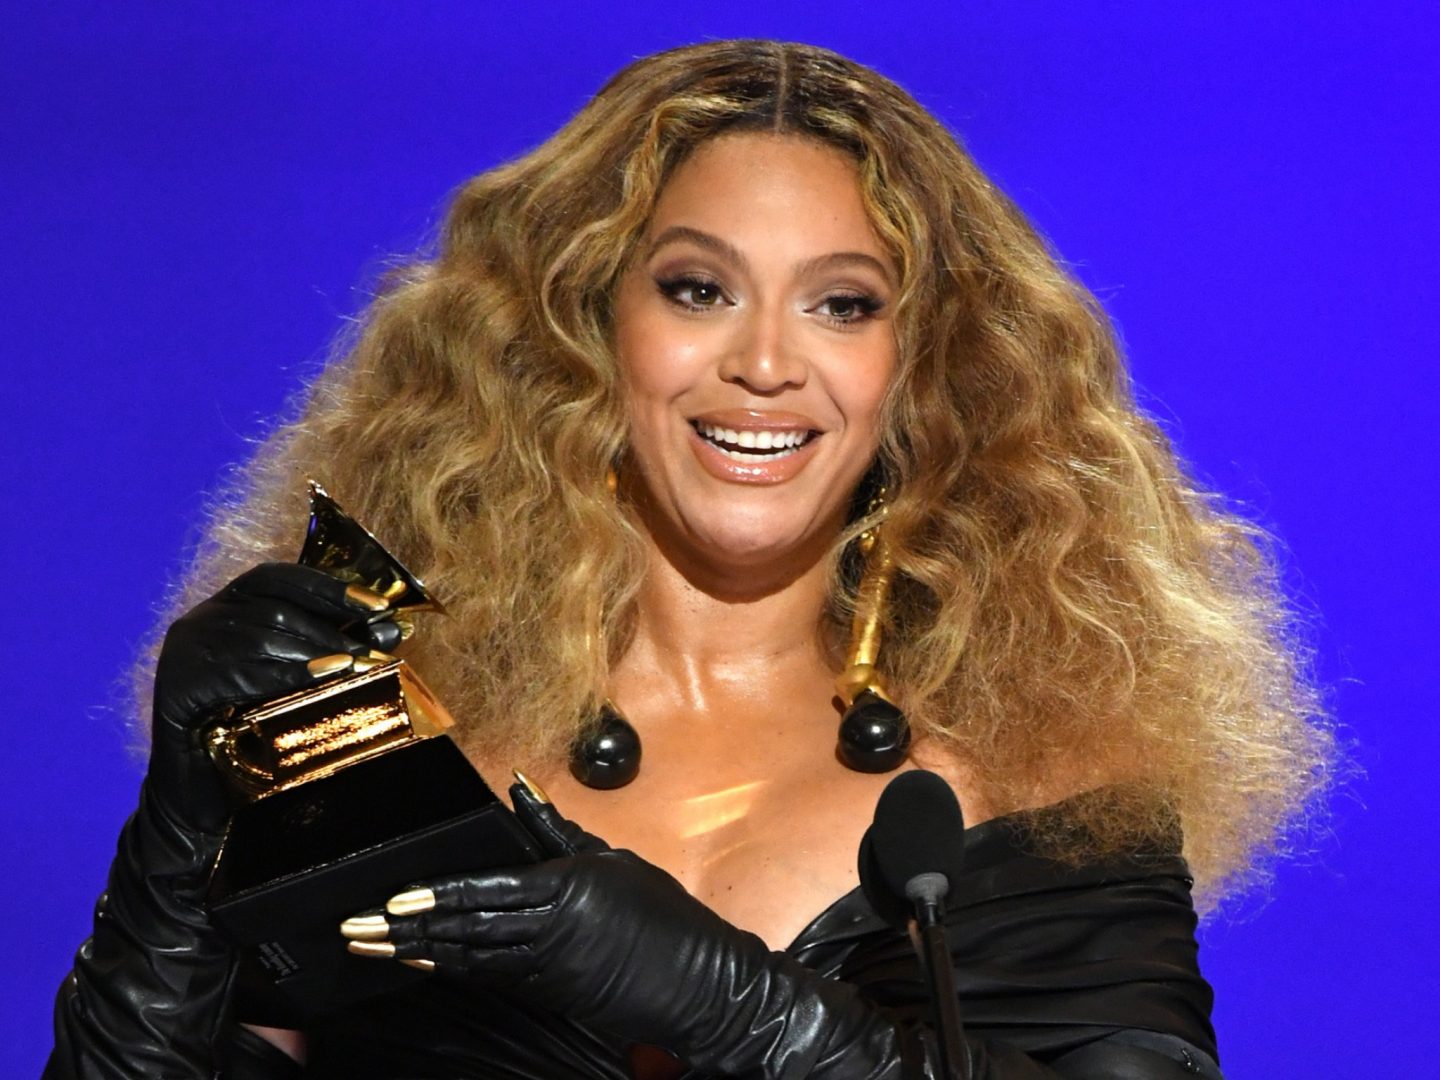 Beyoncé's 'Formation' named best video ever; 'Thriller' not on the list